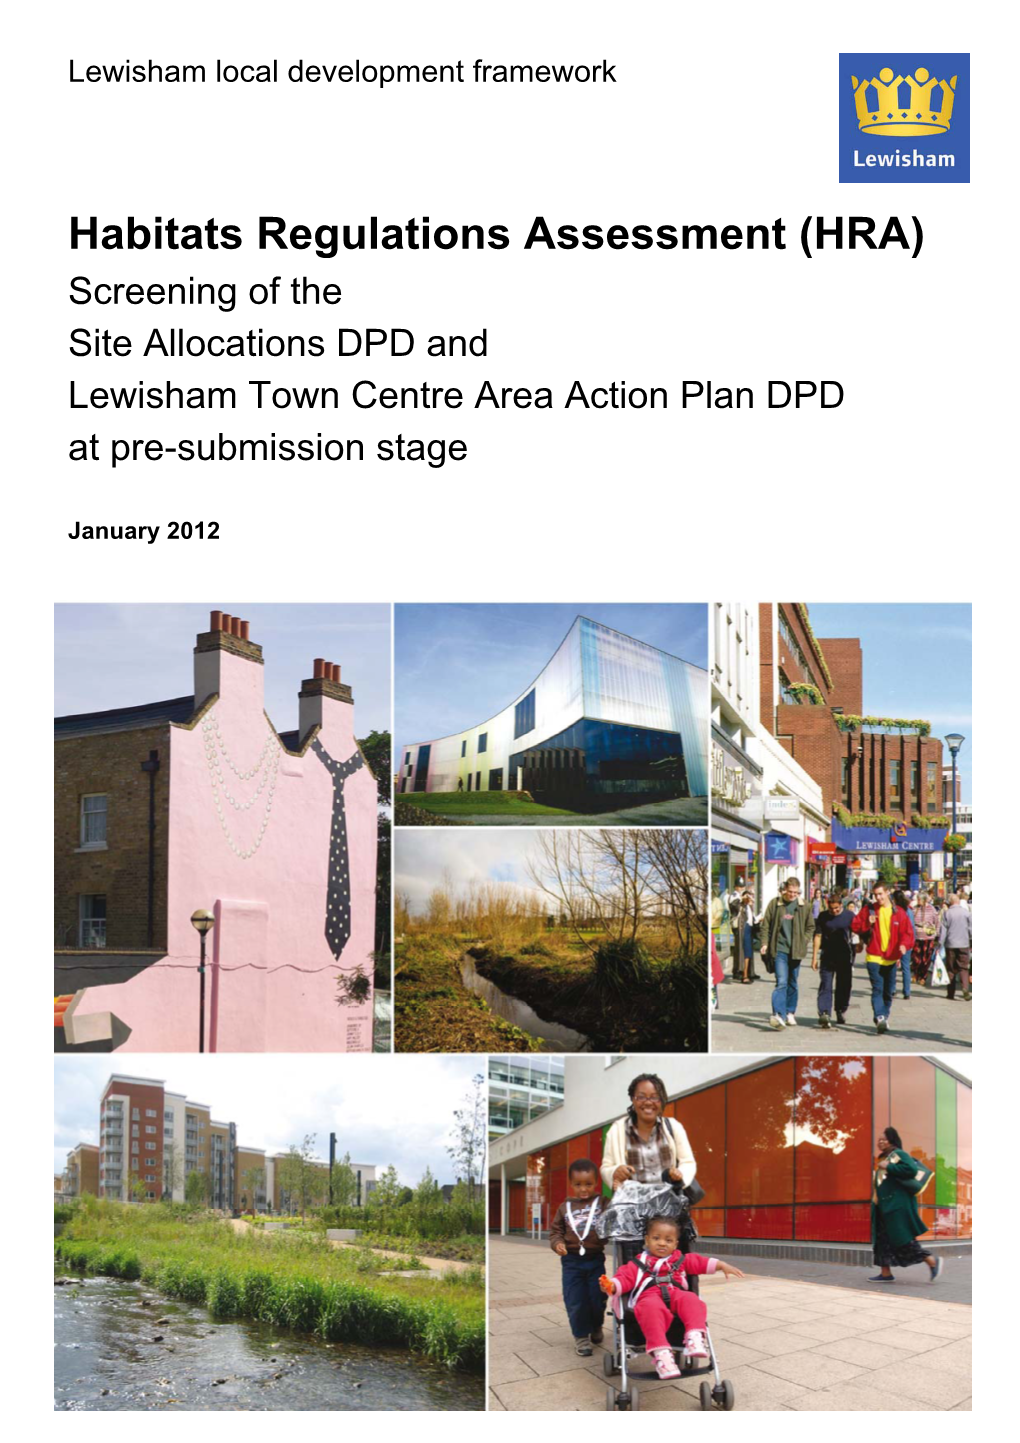 Habitats Regulations Assessment (HRA) Screening of the Site Allocations DPD and Lewisham Town Centre Area Action Plan DPD at Pre-Submission Stage